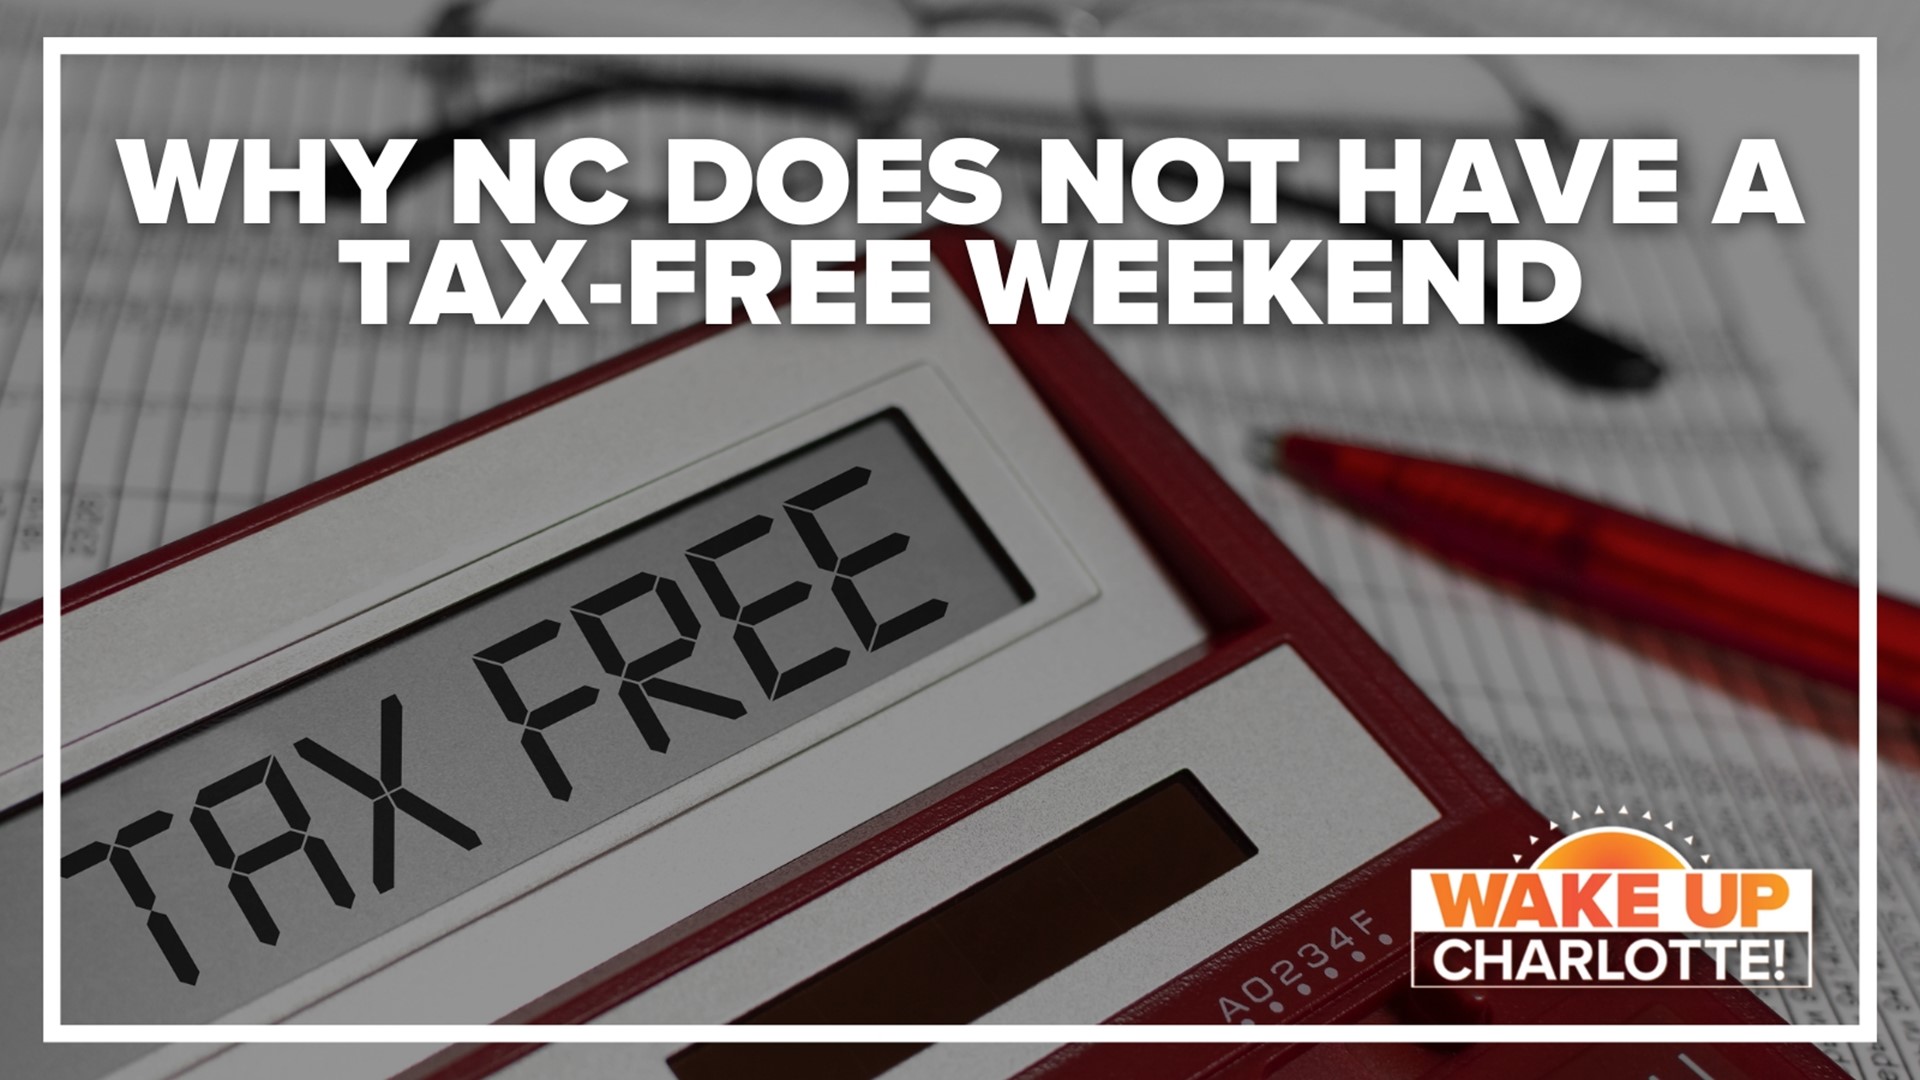 South Carolina, Tennessee and Virginia all offer tax-free weekends of their own, but North Carolina's tax-free weekend ended years ago.